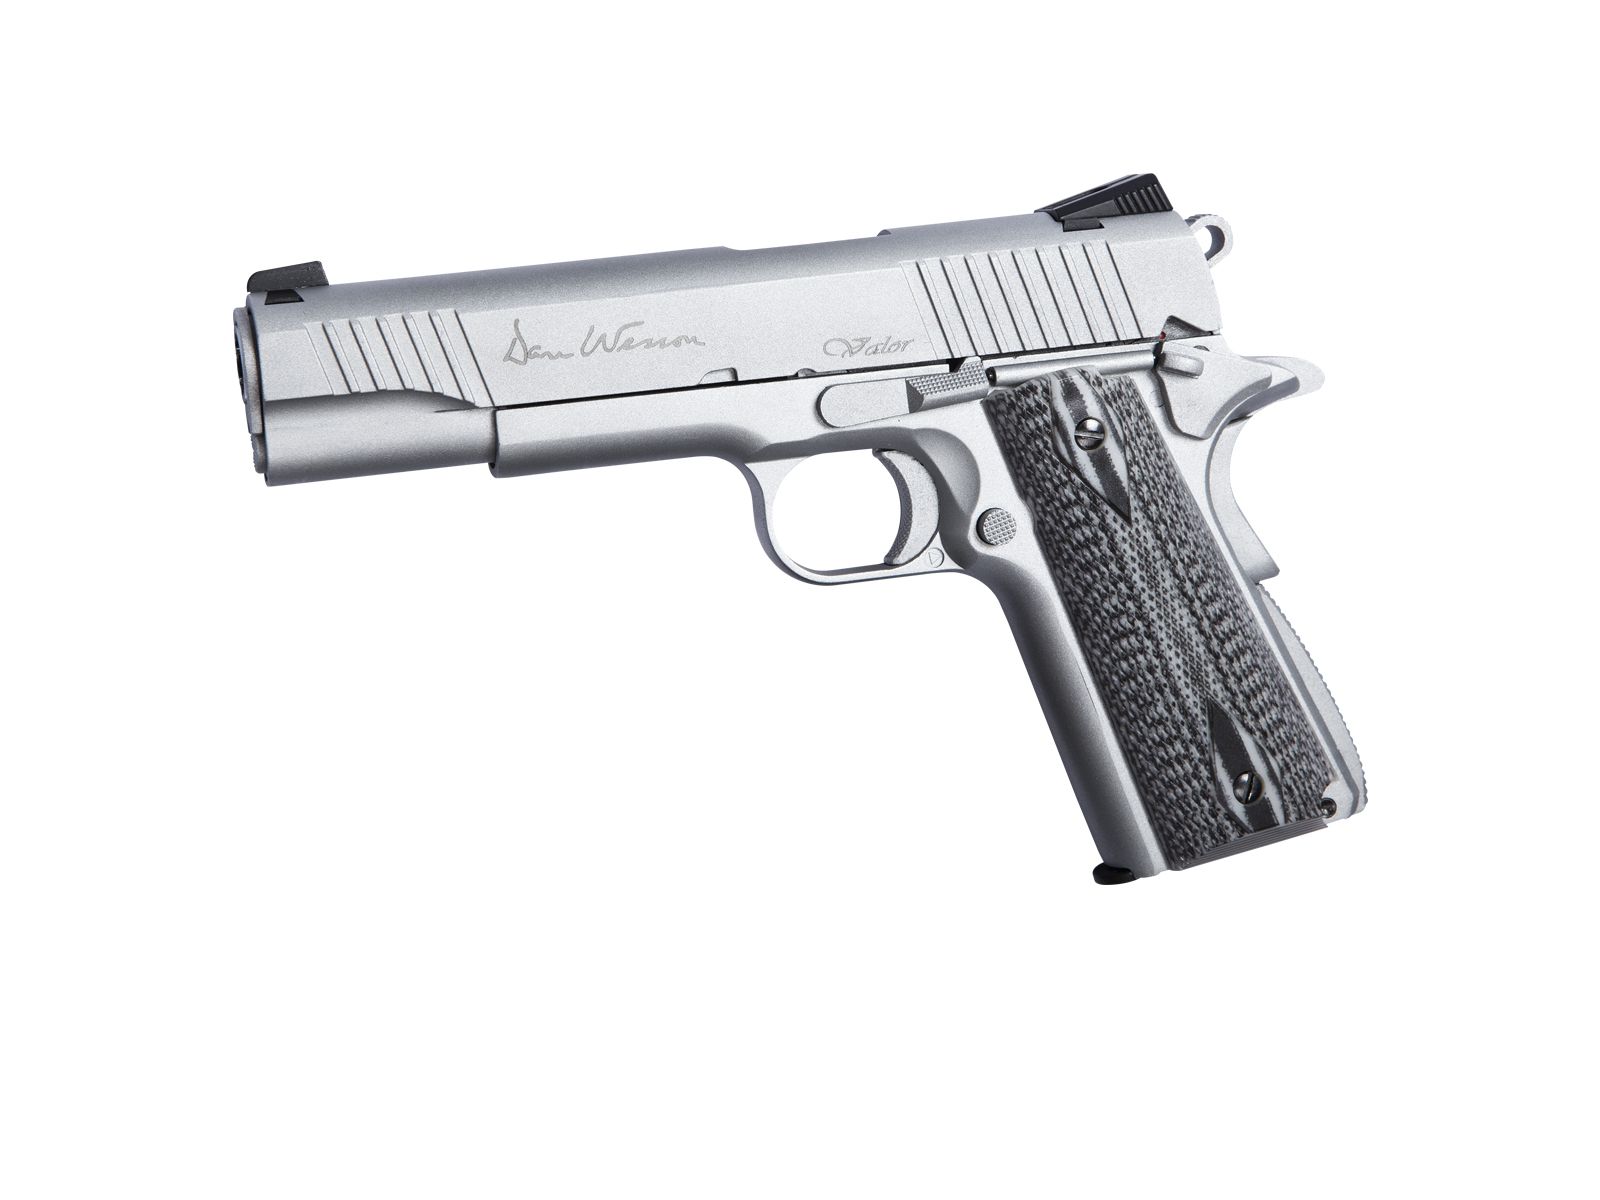 Dan%20Wesson%20VALOR%201911%20CO2%20MODEL%20Airsoft%20TABANCA